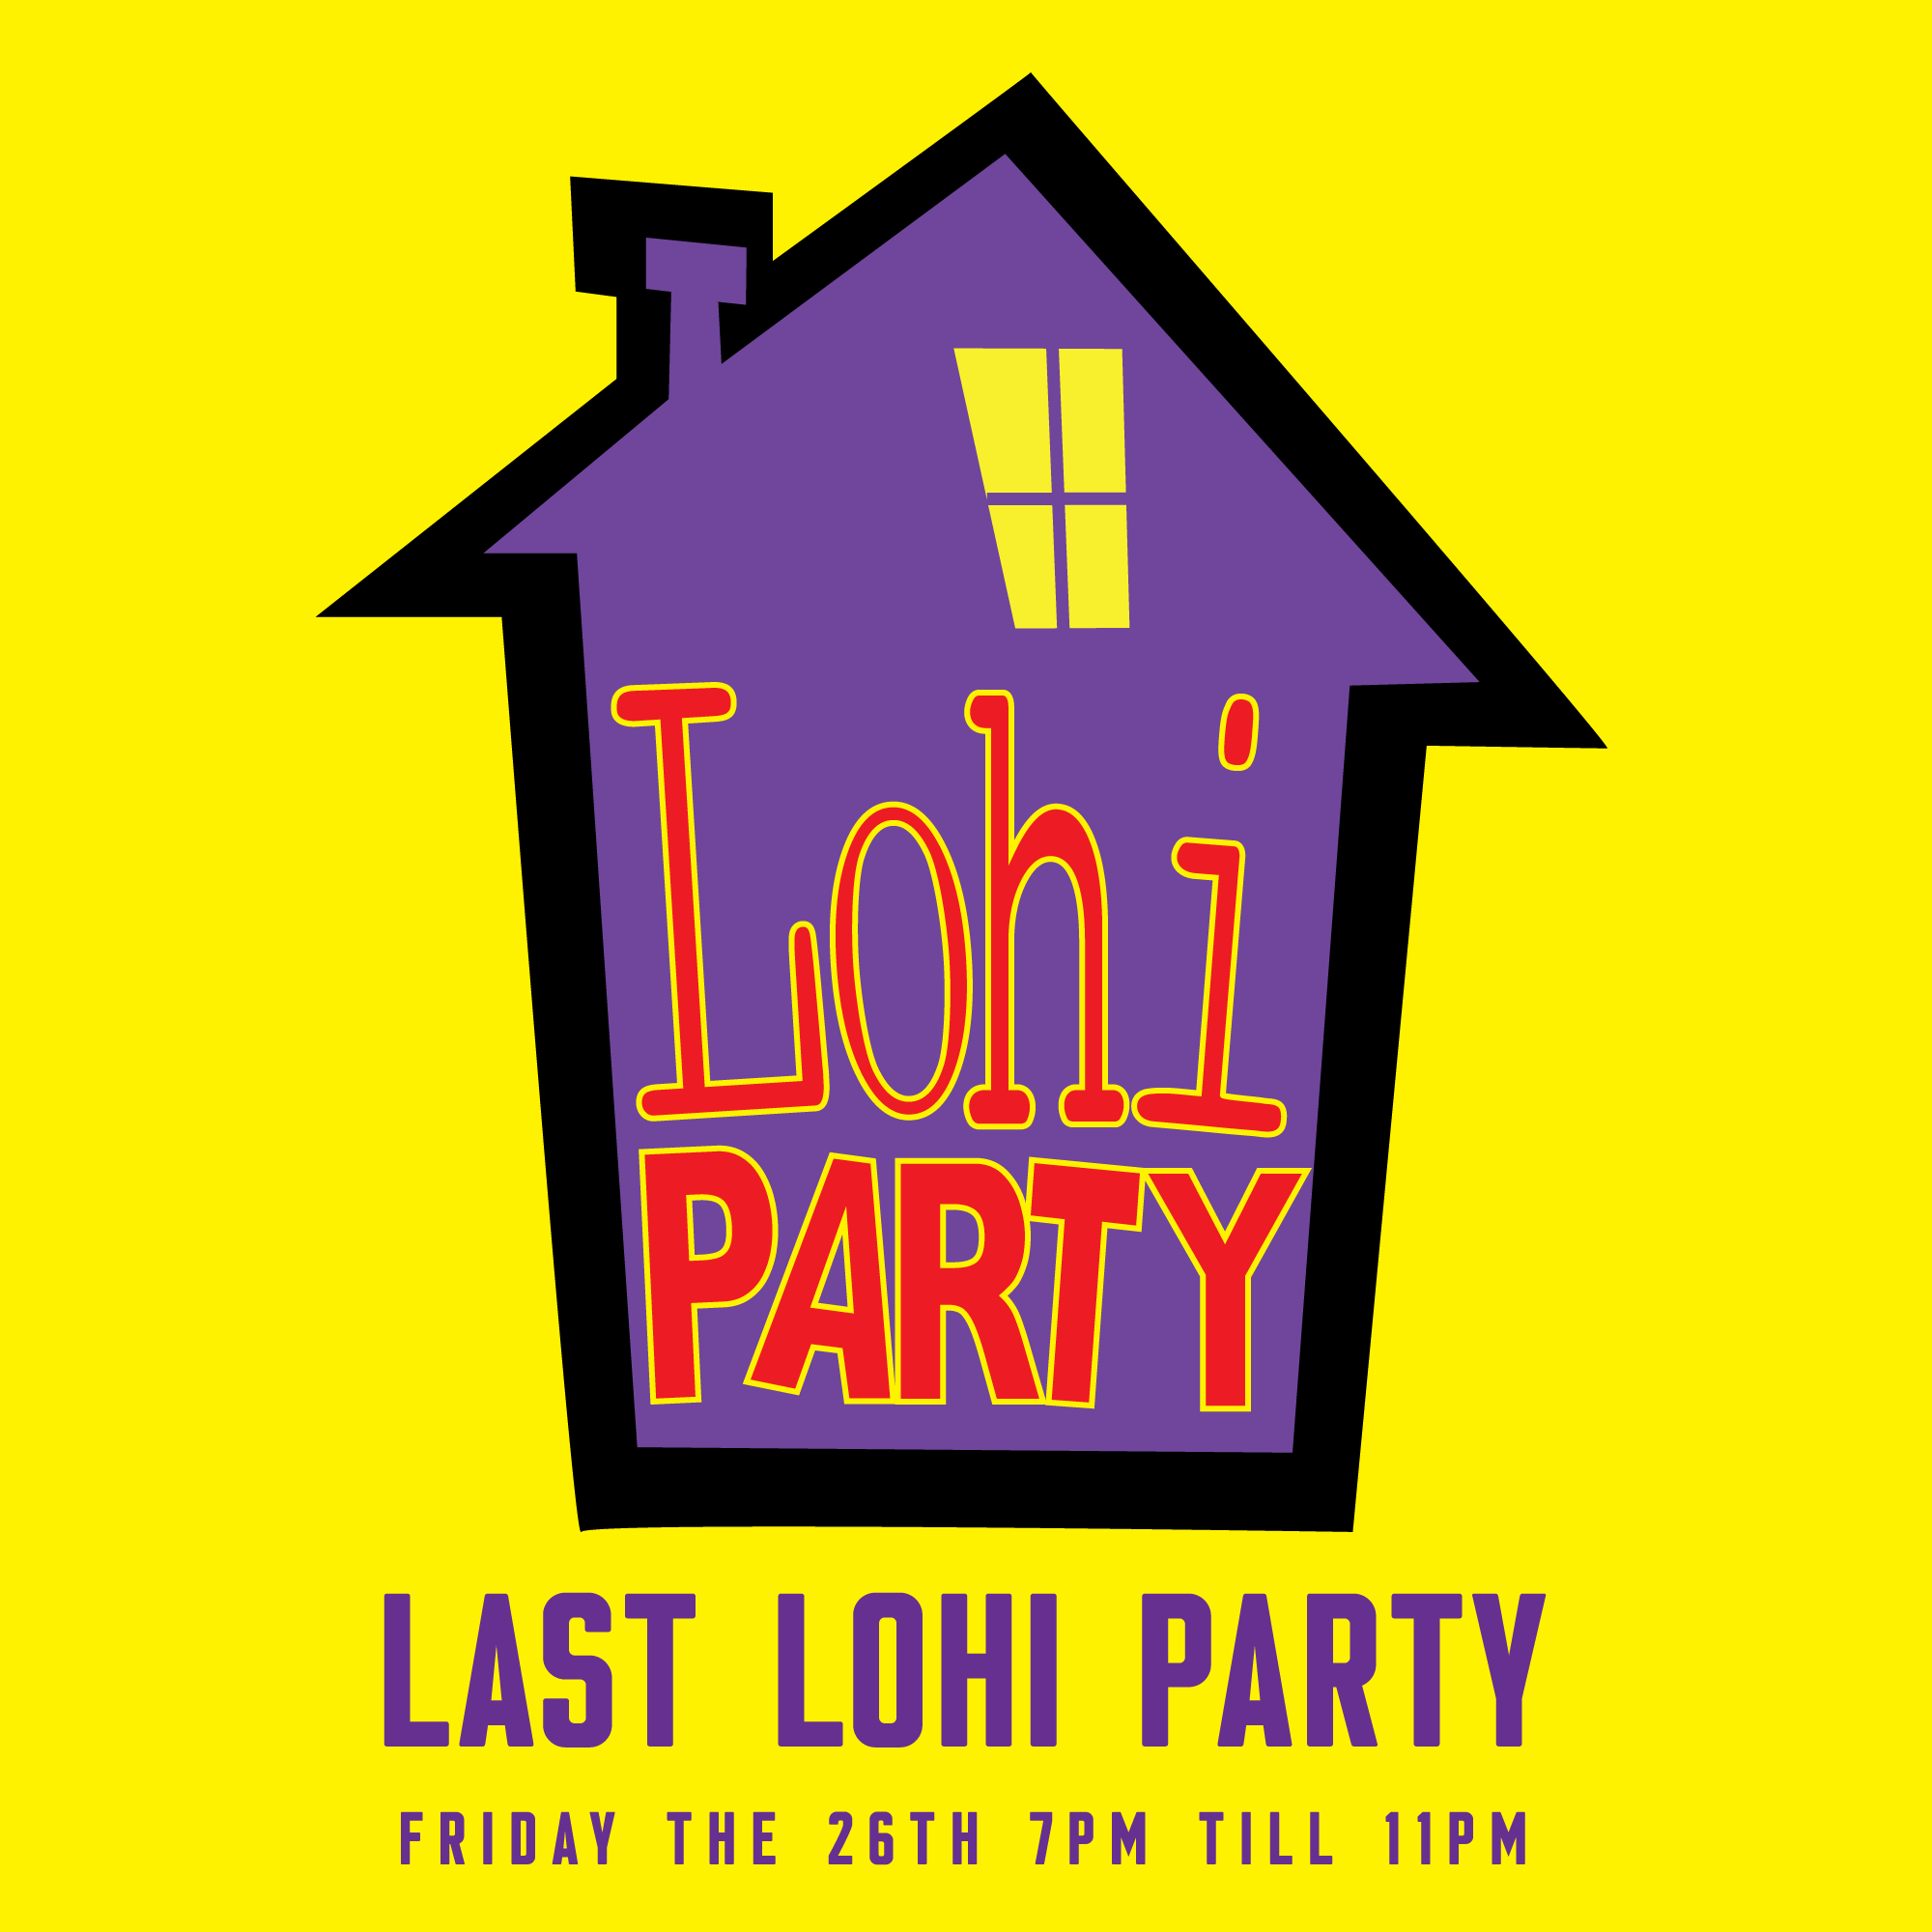 The Last LoHi Party